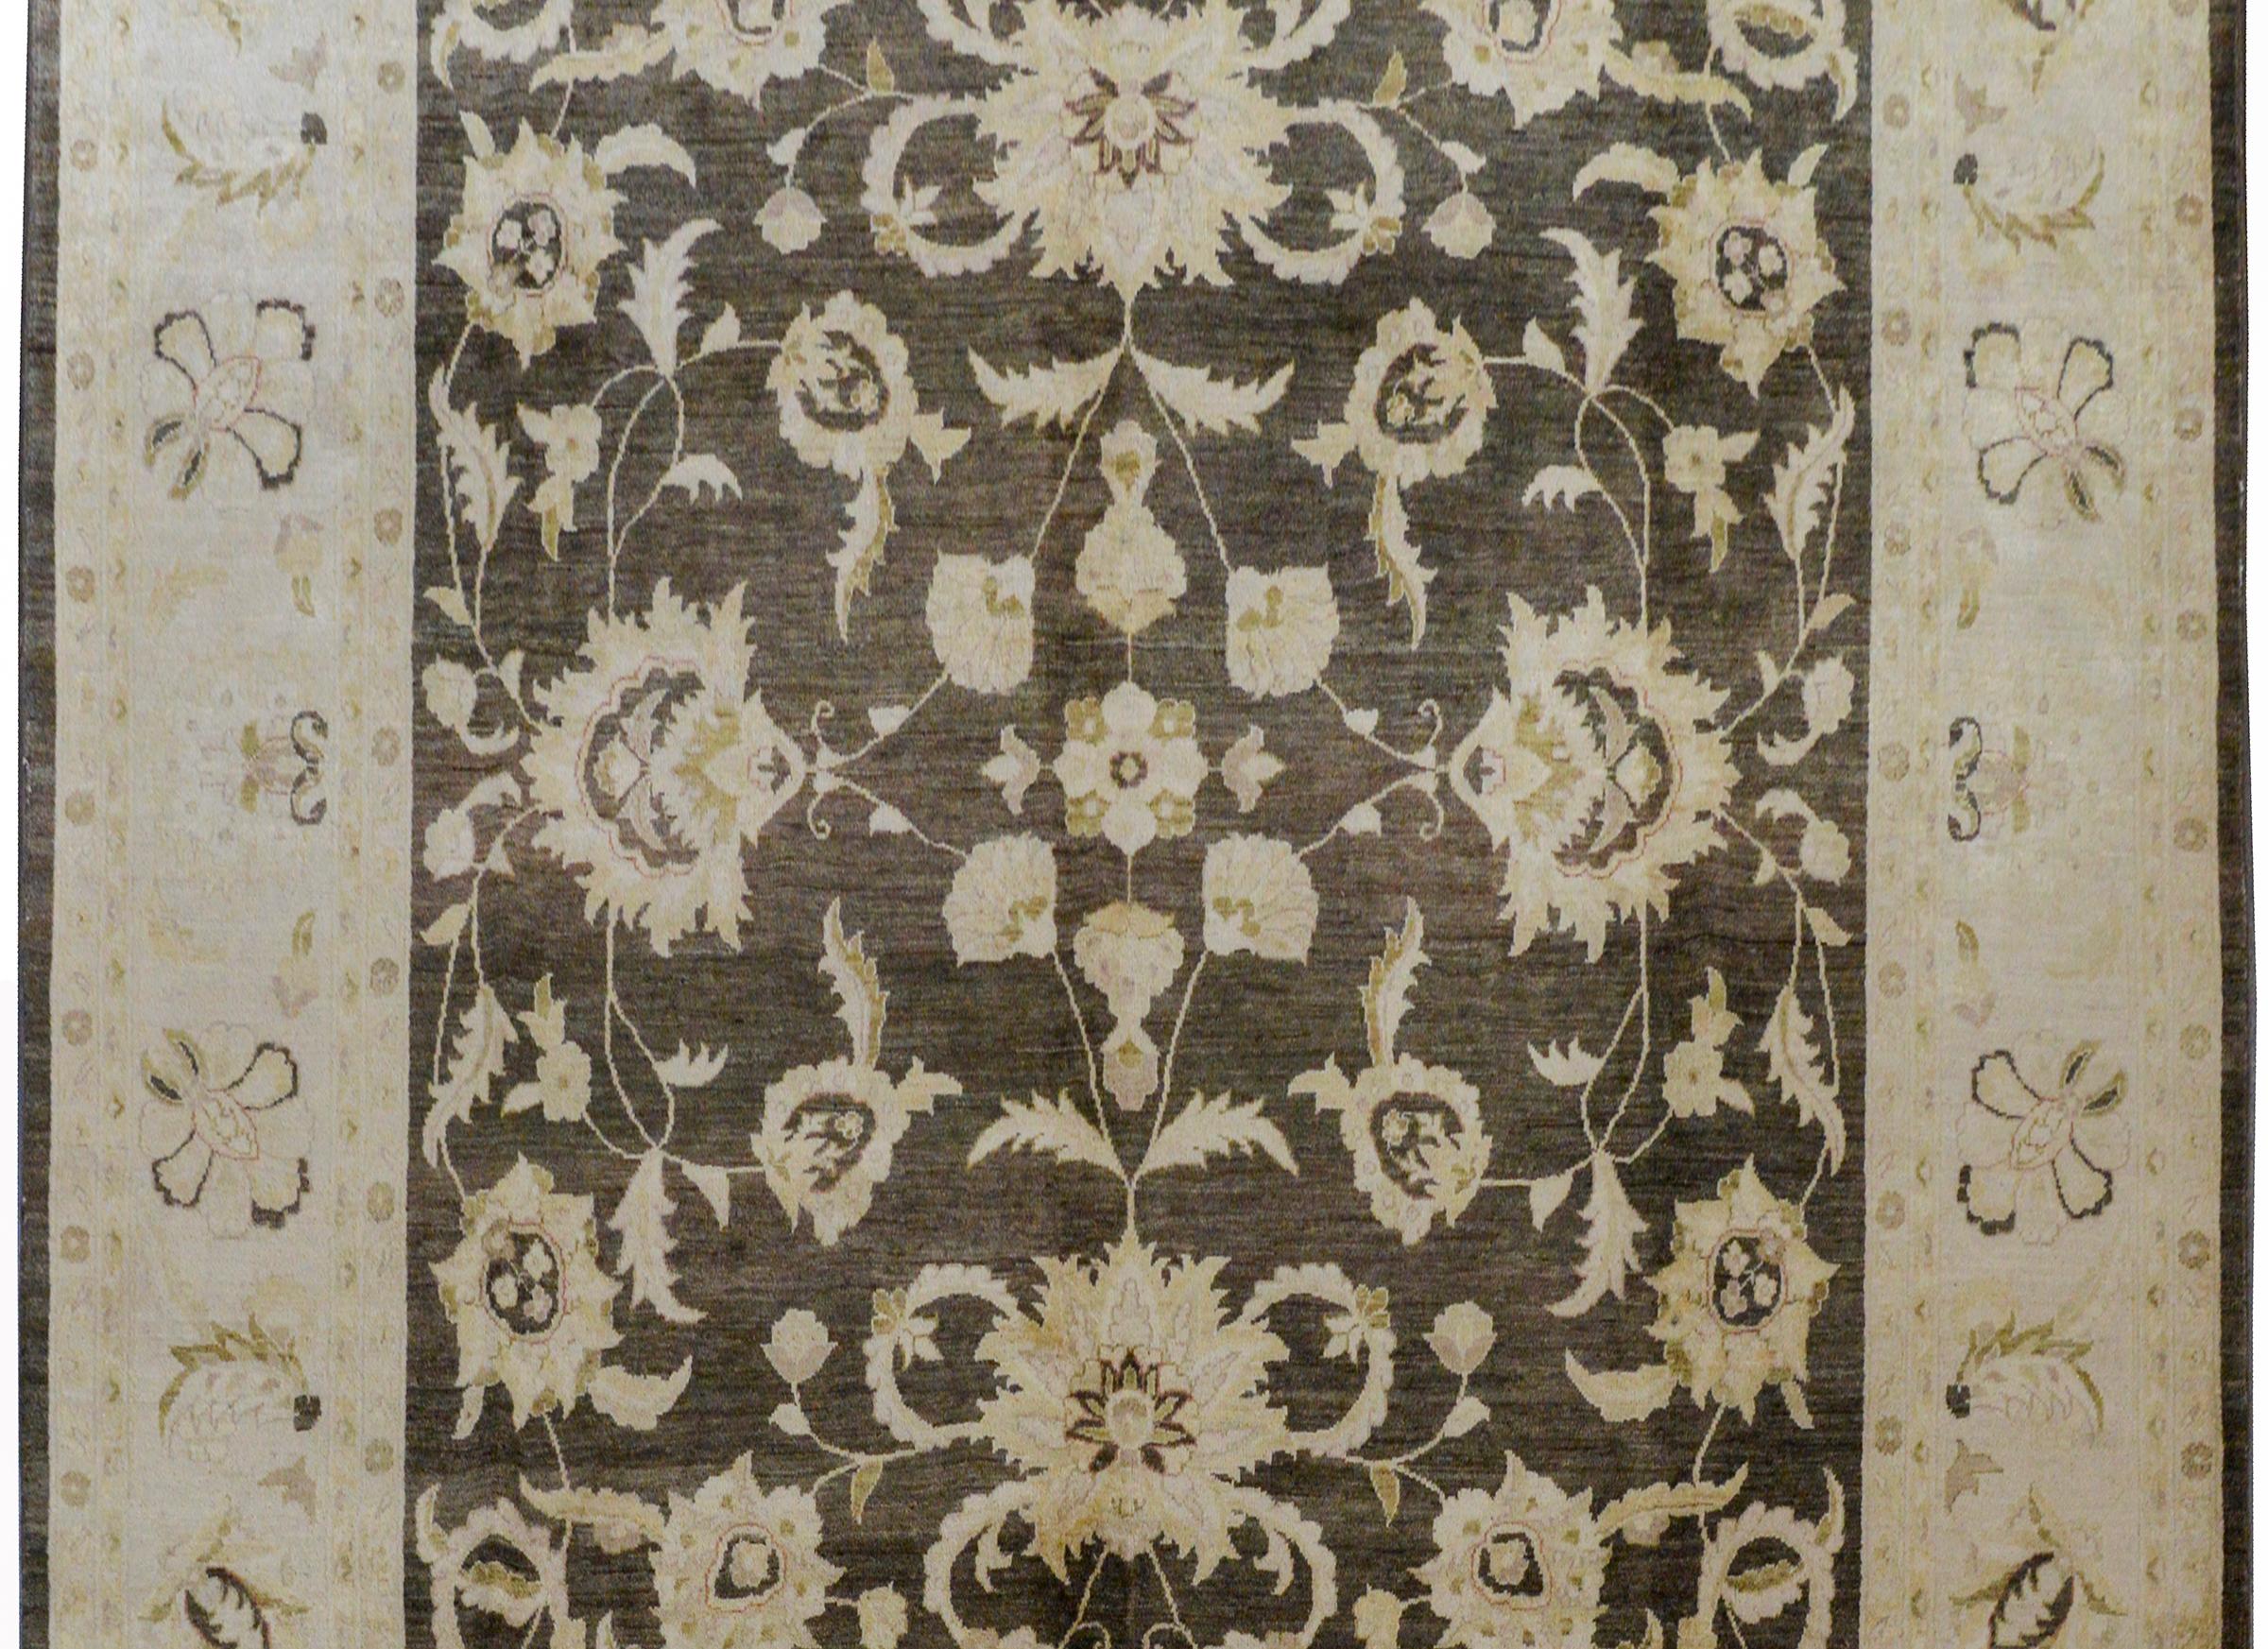 A wonderful vintage Pakistani rug with an all-over field of large flowers and scrolling vines woven in muted greens and golds, on a dark brown background. The border is exceptional with a similarly patterned and colored border but with a cream